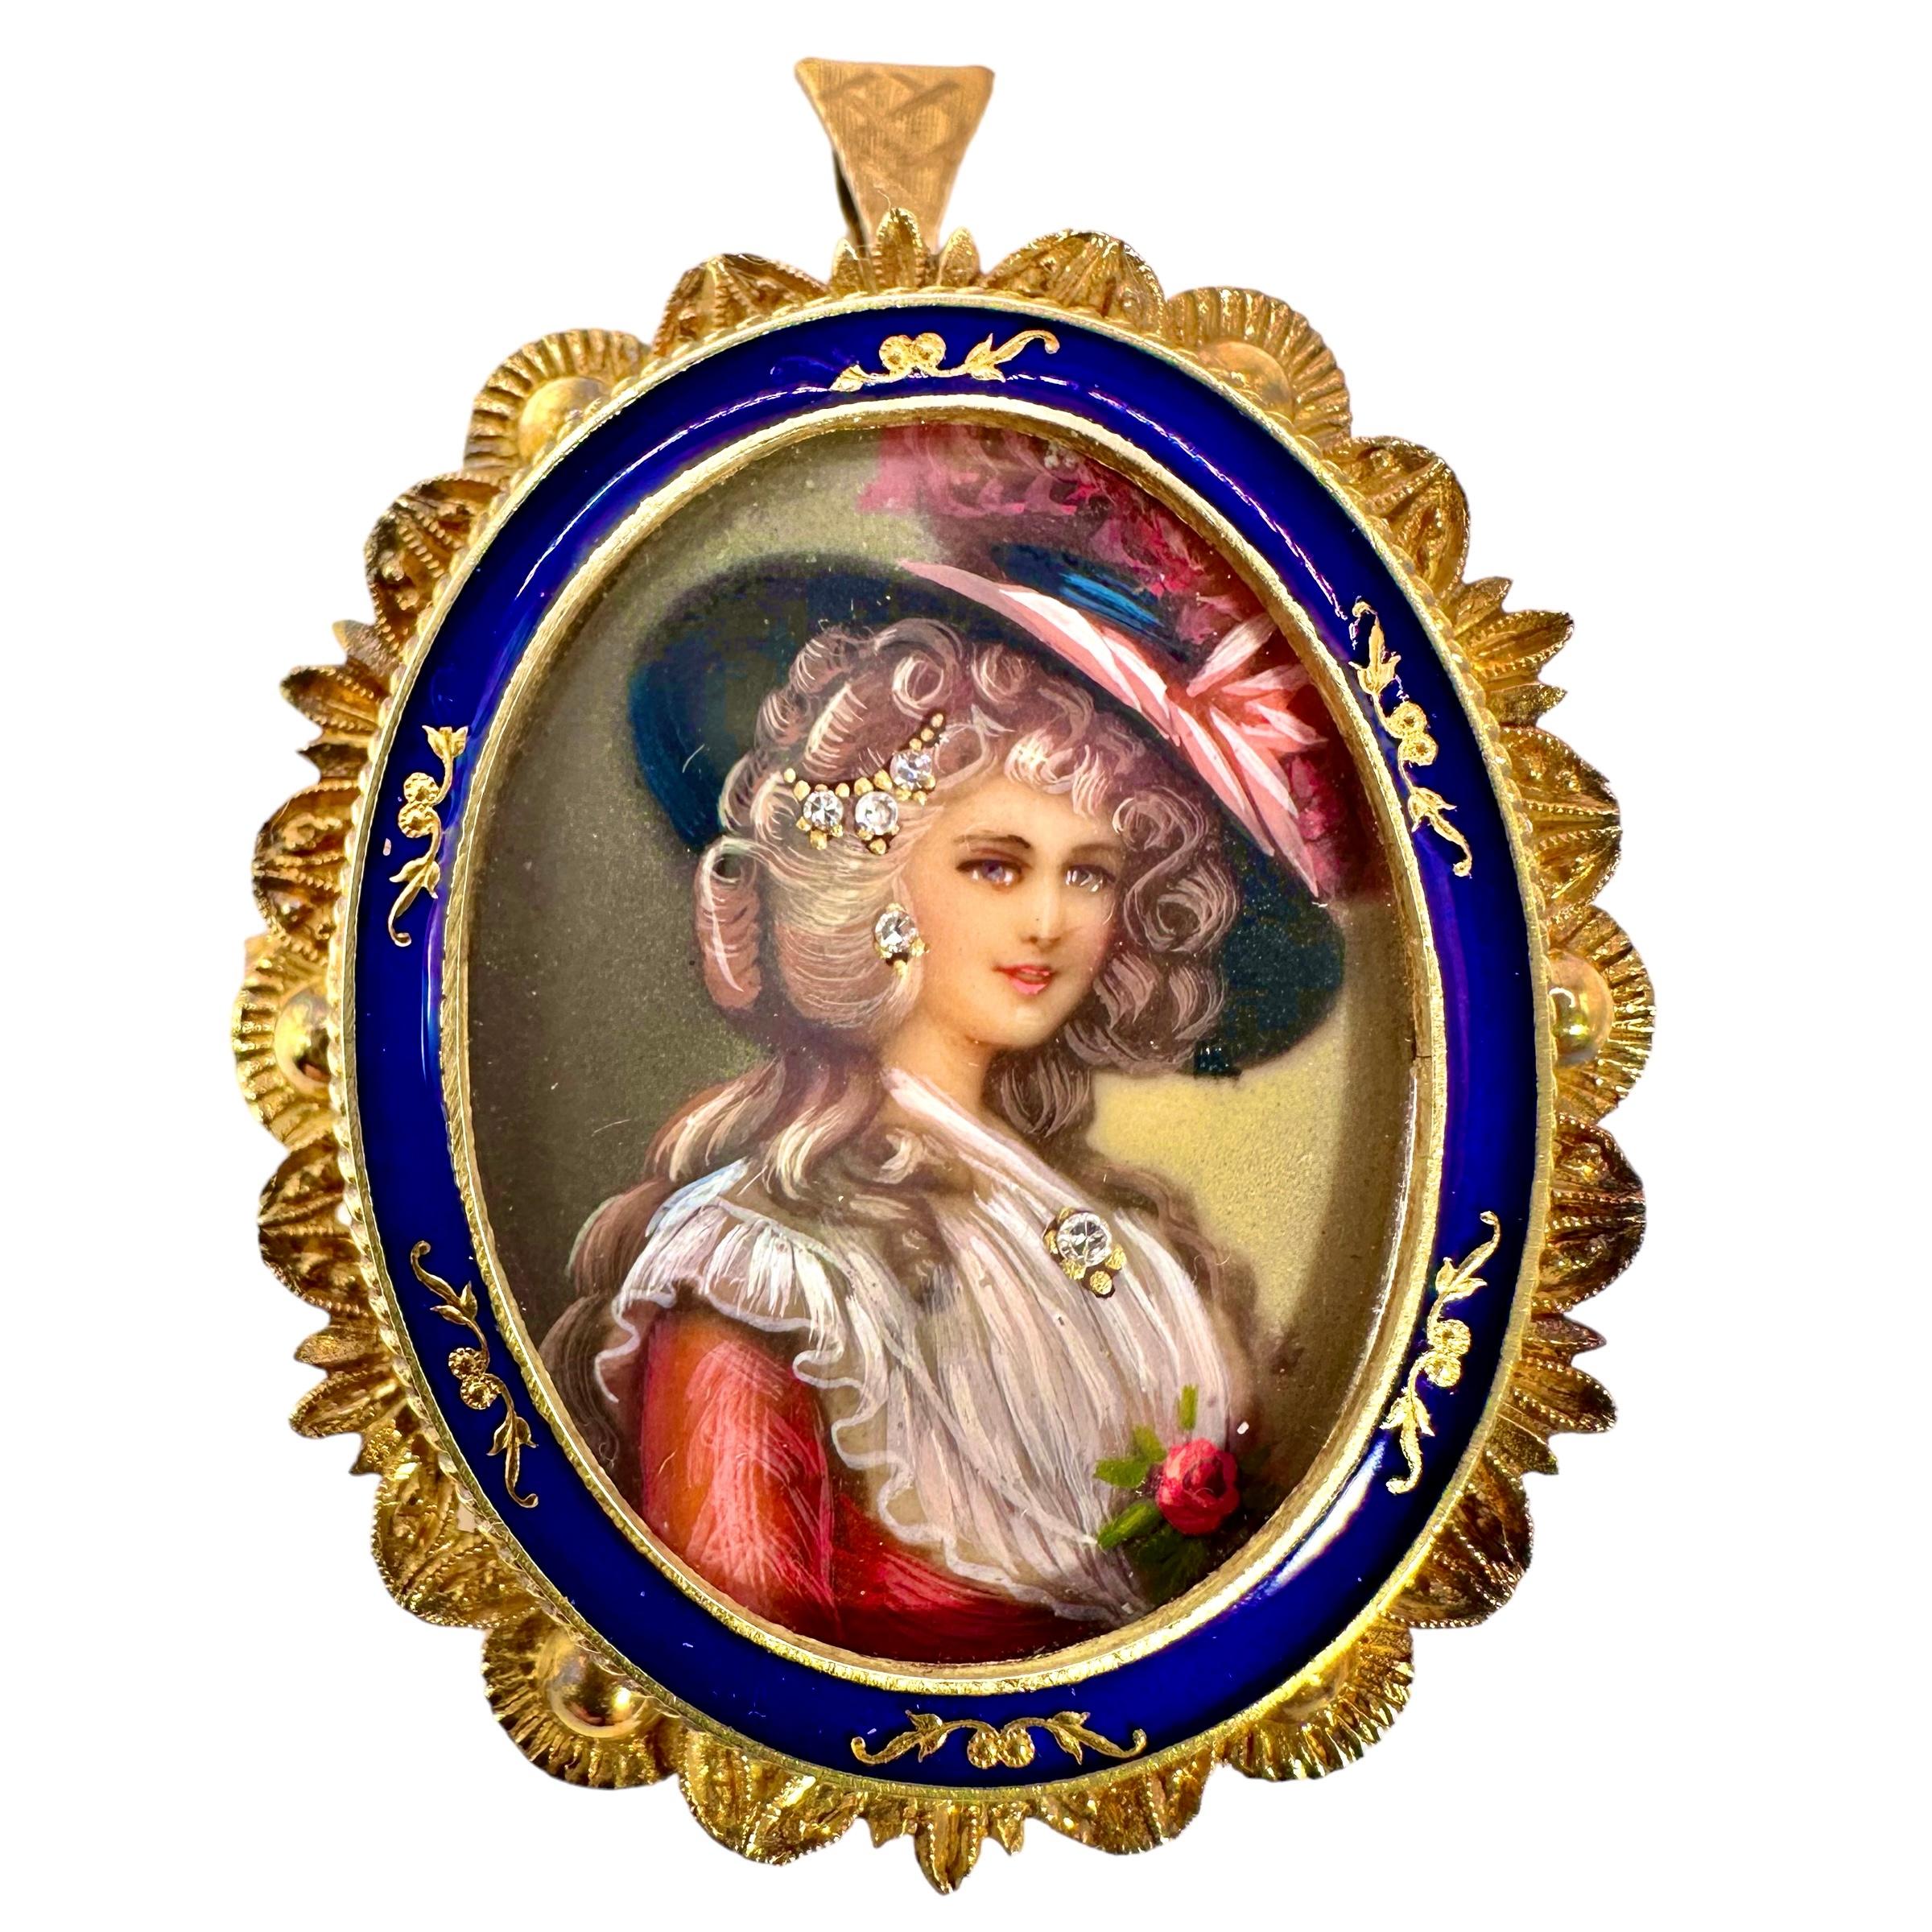 A hand painted portrait of a 19th century lady adorned with a diamond pendant, diamond earrings, and a diamond hair pin,
wearing a large hat. This lovely portrait is framed by an 18K yellow gold and cobalt blue enamel frame inside a fancy gold outer